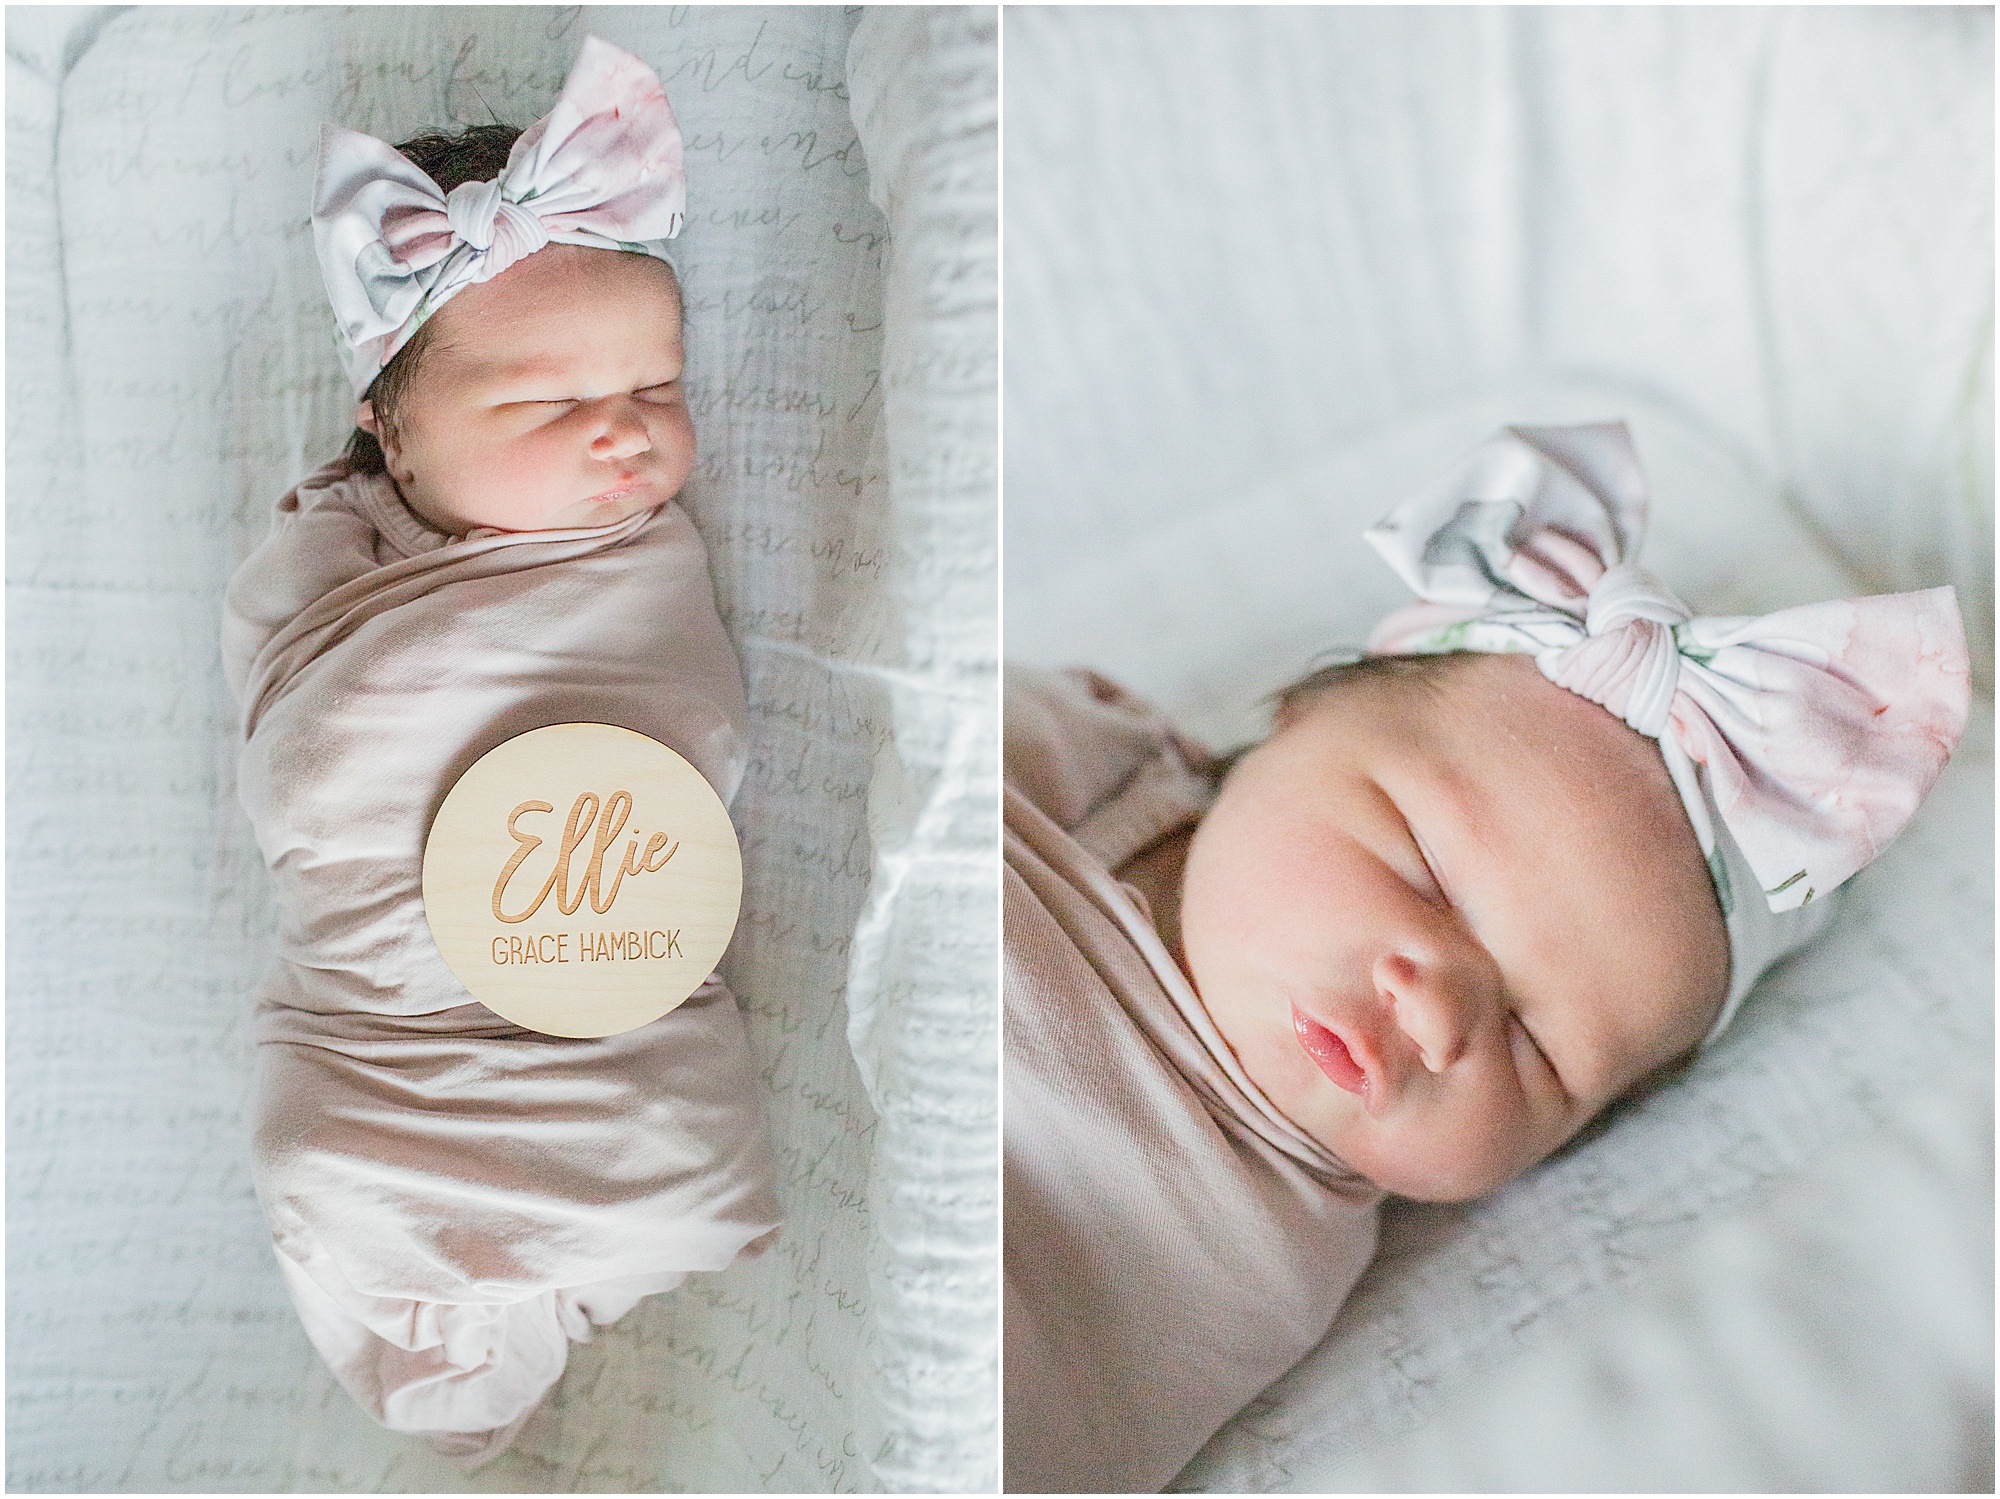 Introducing Ellie Grace Hambick